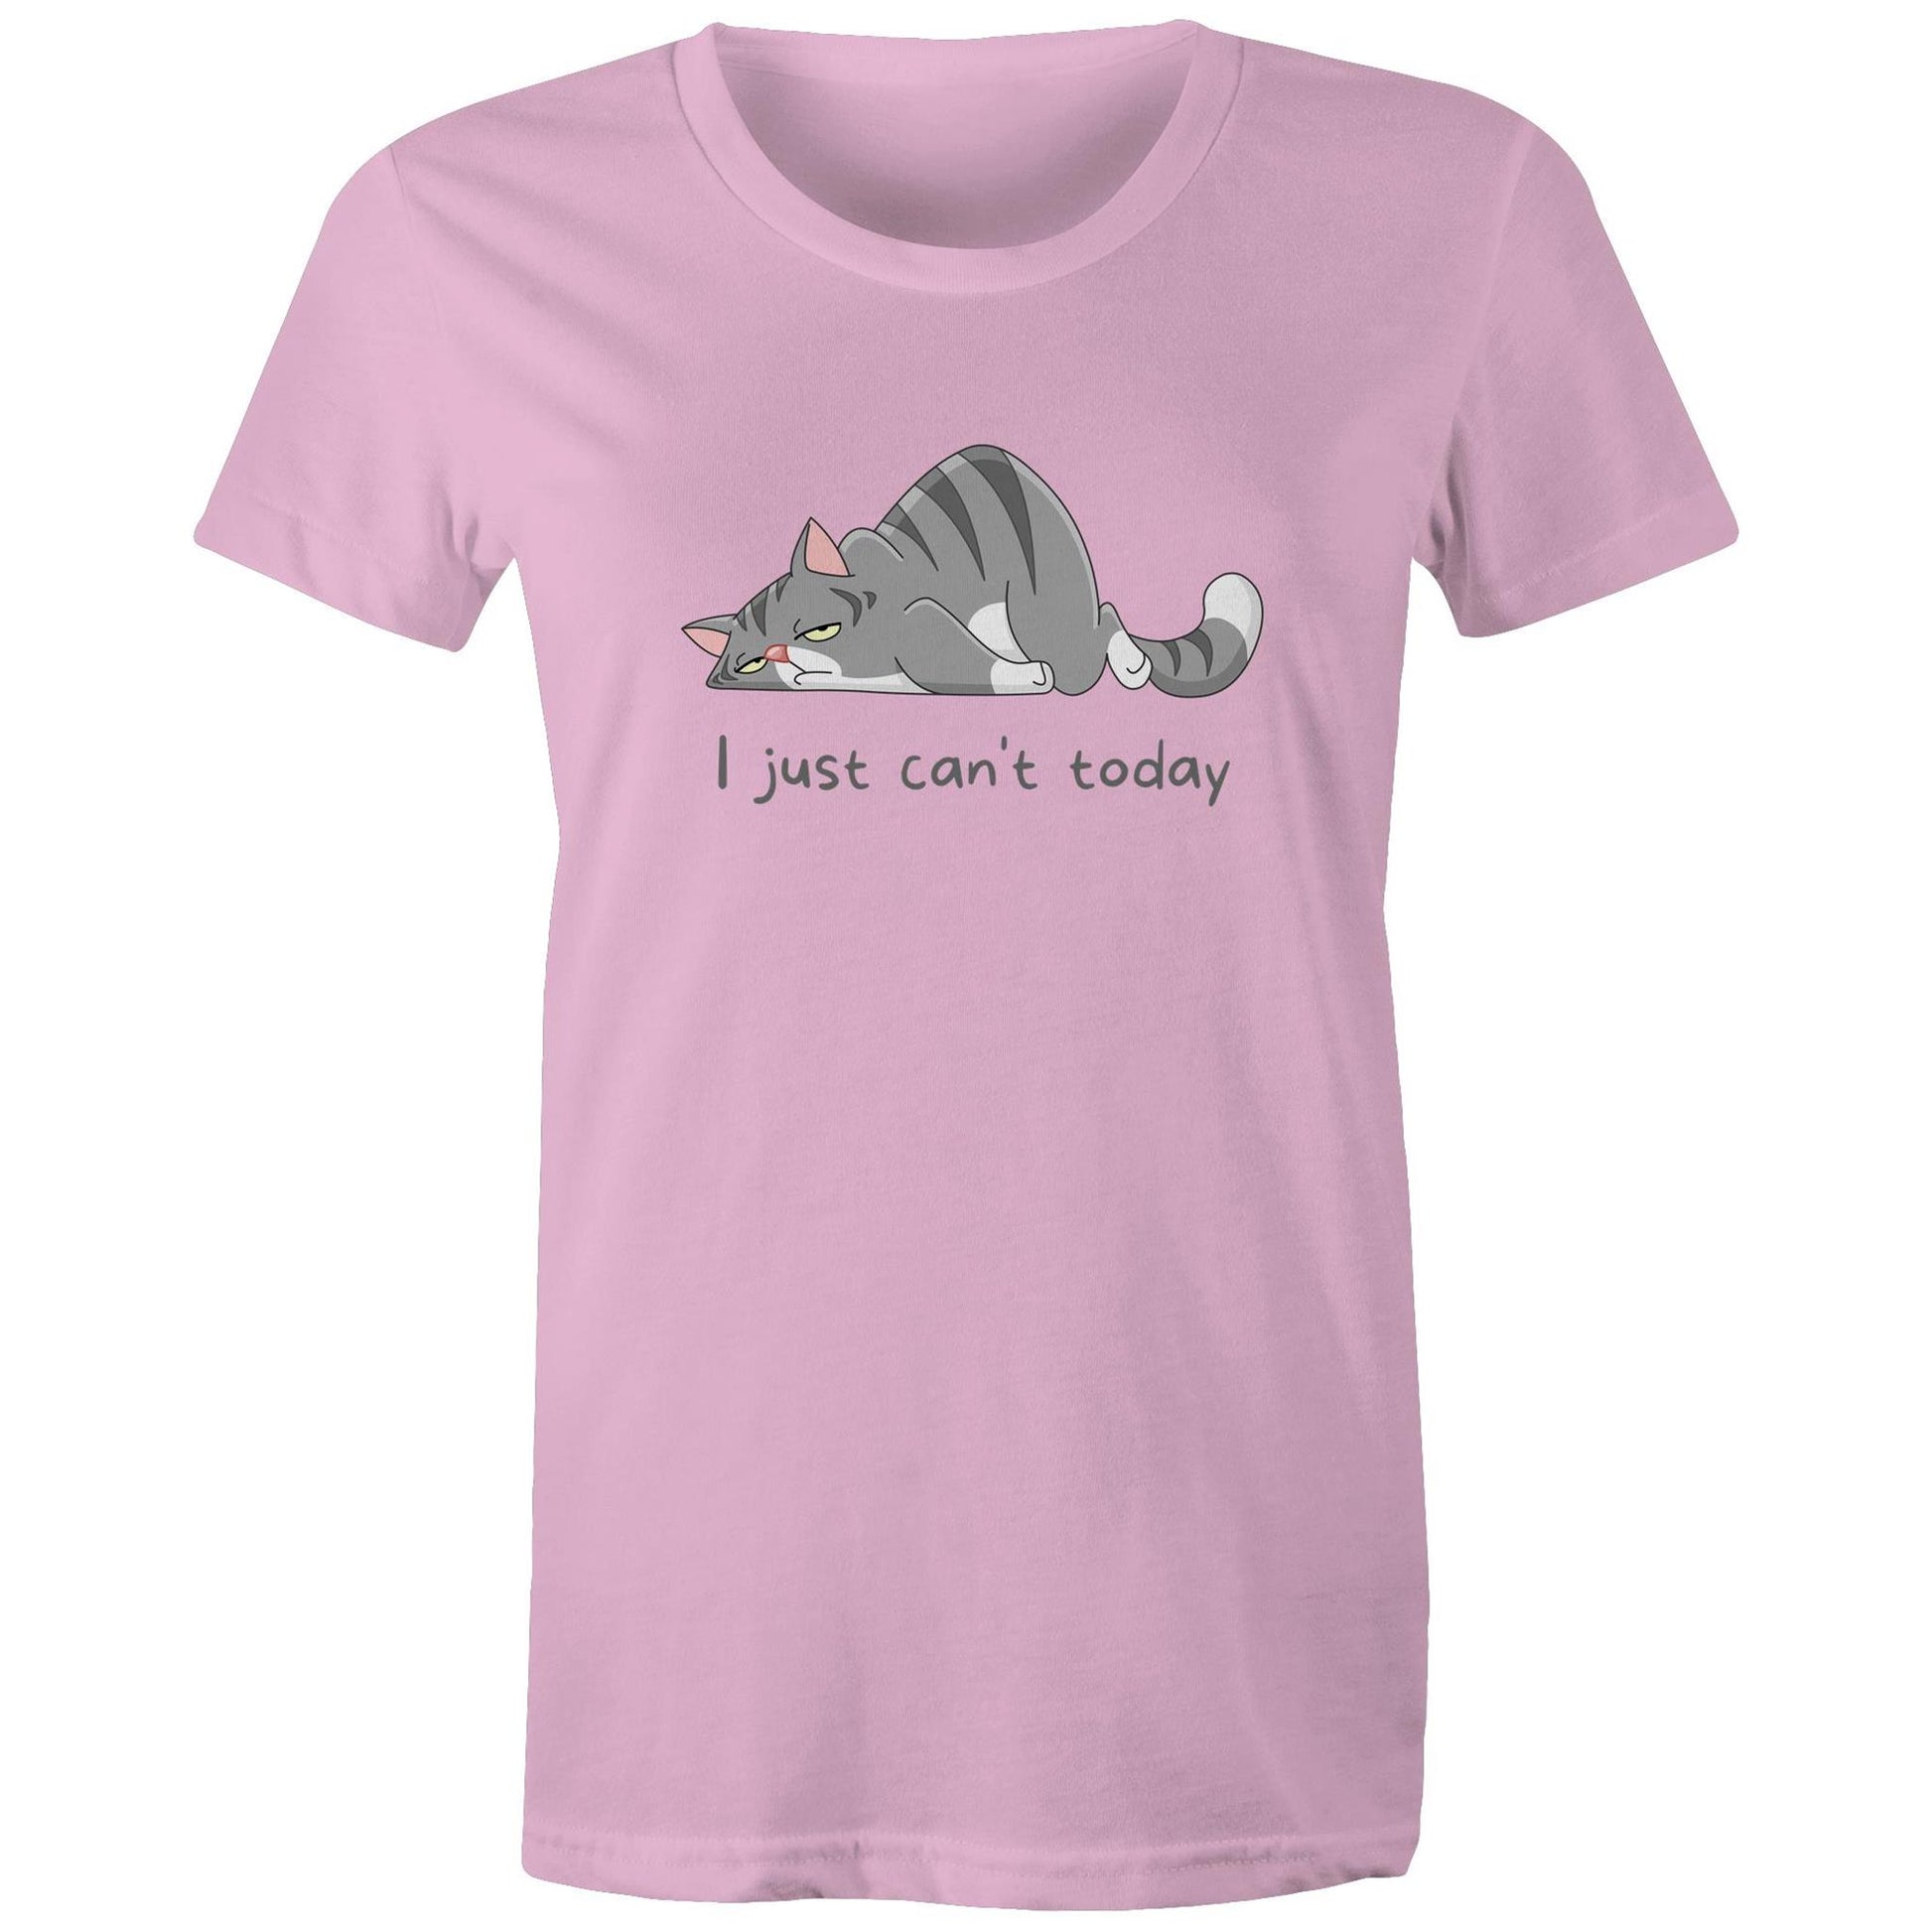 Cat, I Just Can't Today - Womens T-shirt Pink Womens T-shirt animal